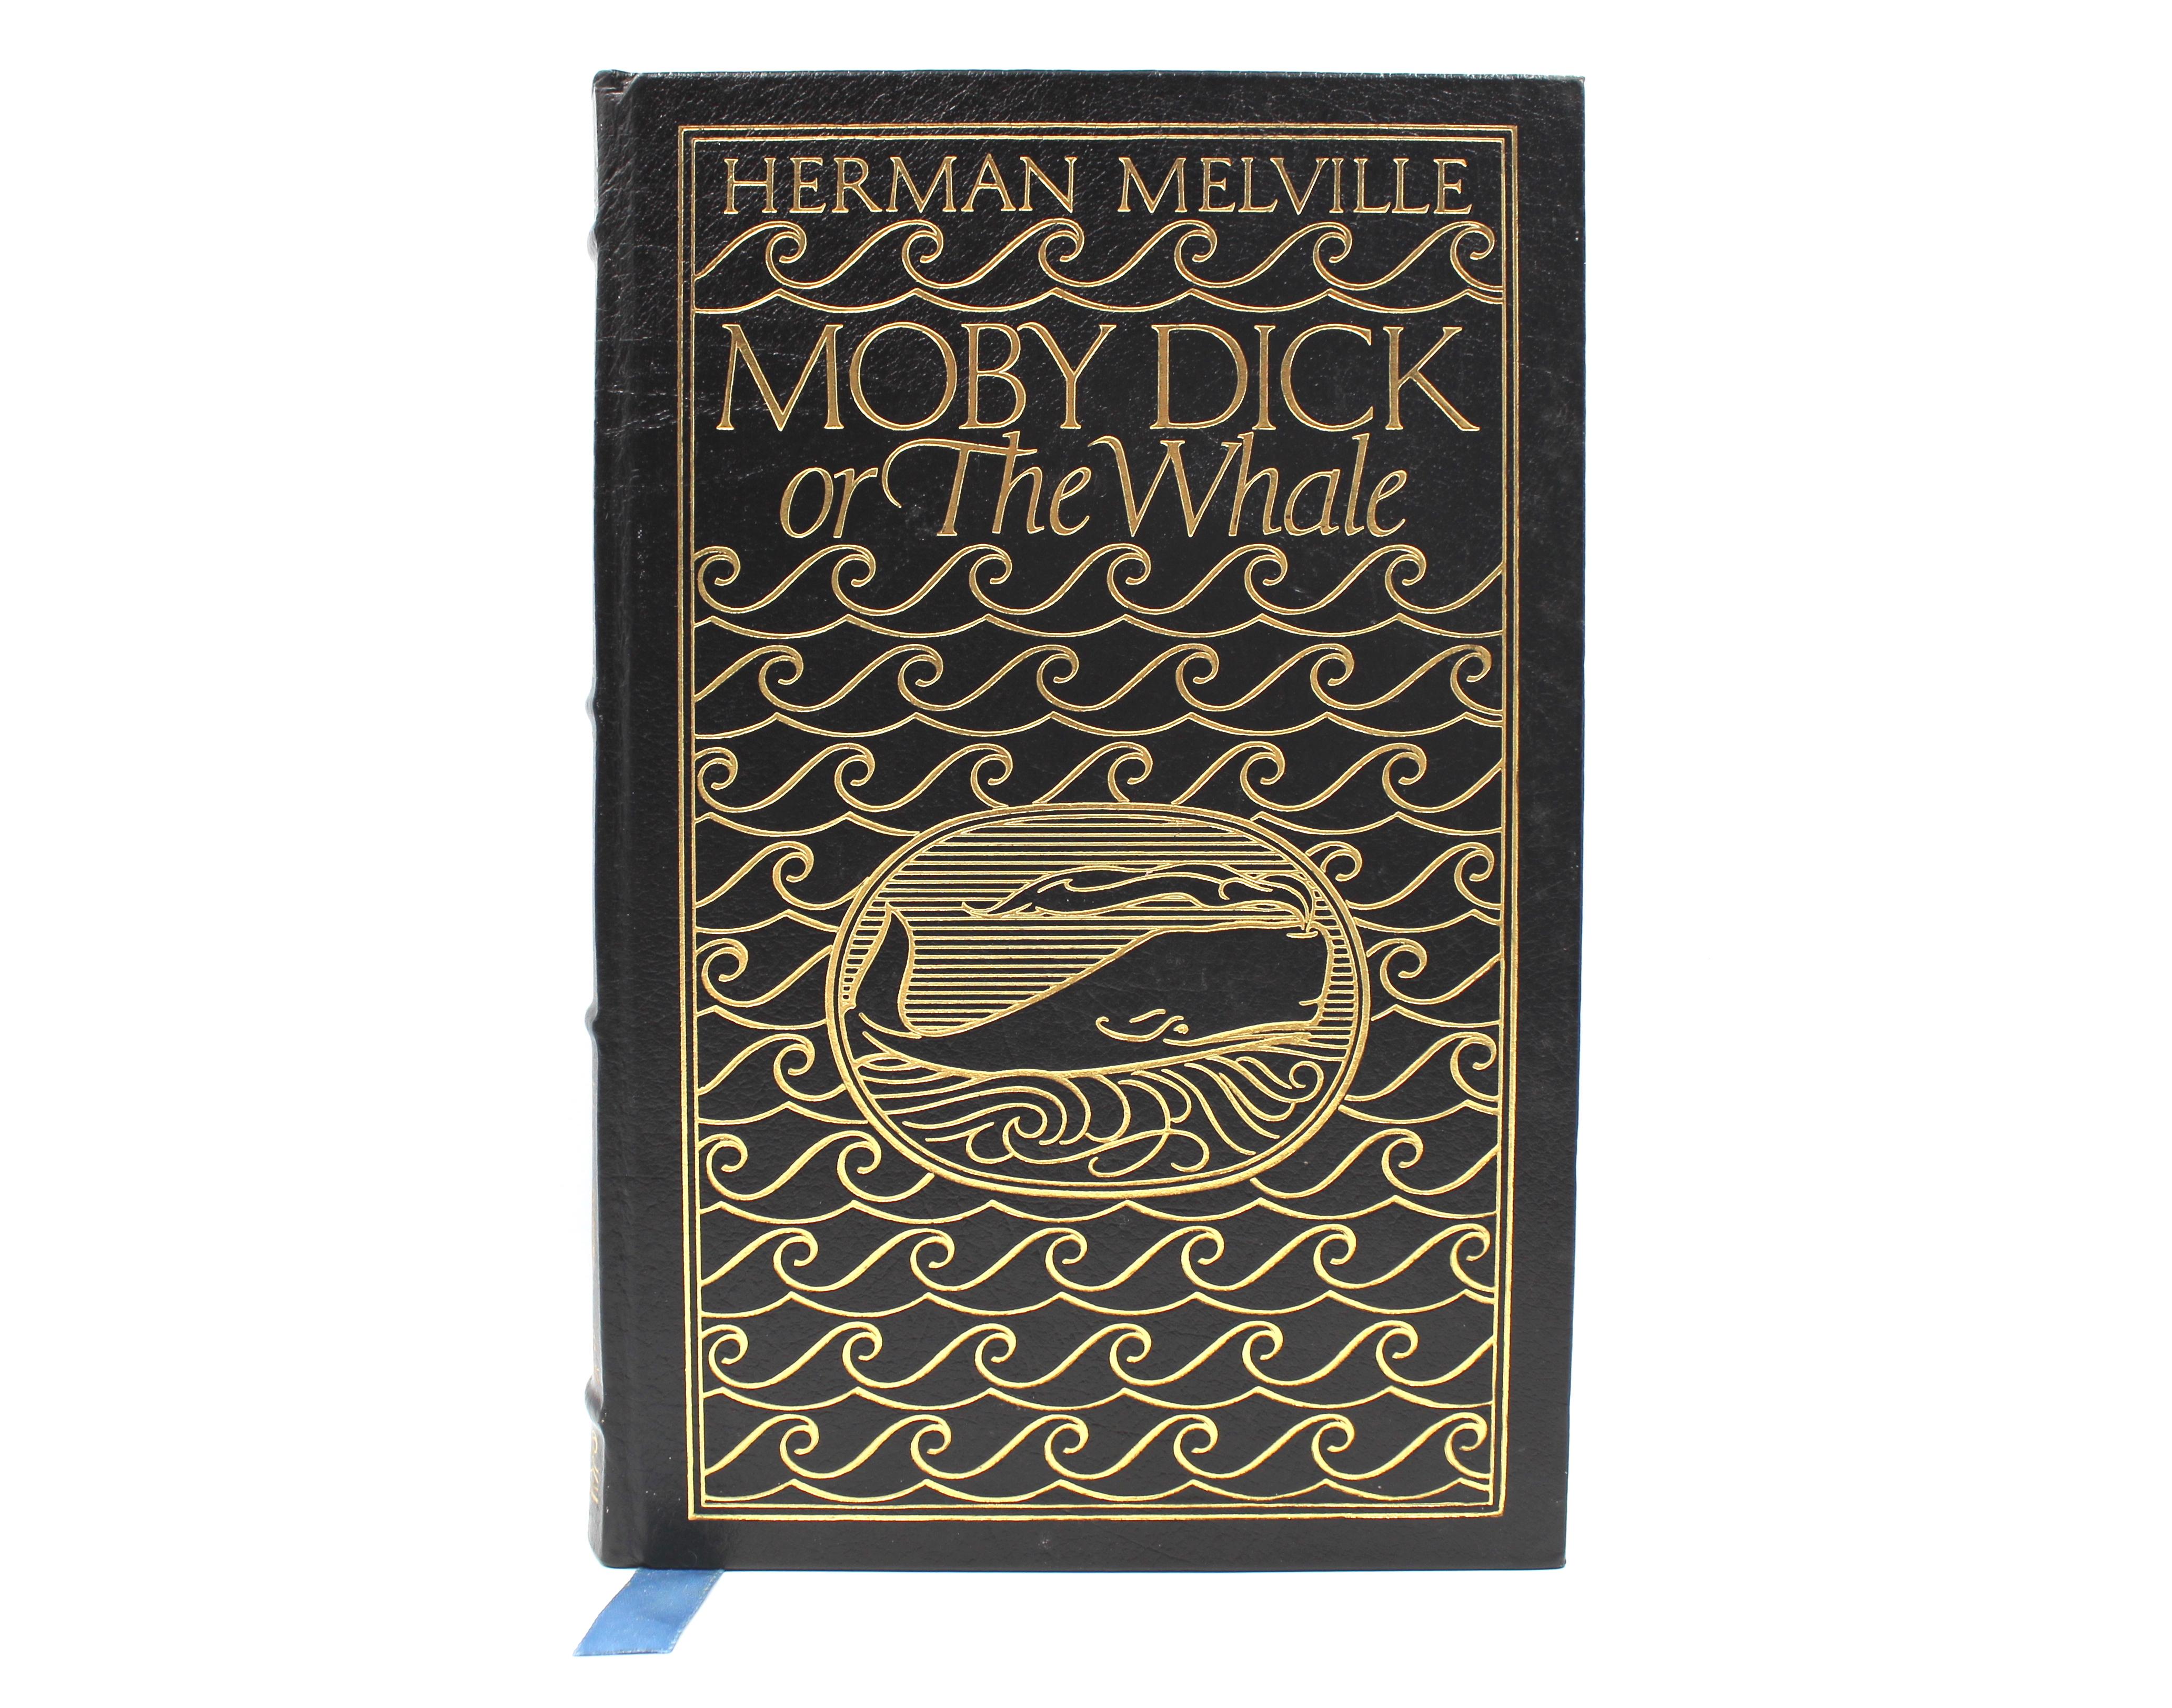 Melville, Herman. Moby Dick, Or The Whale. Norwalk: Easton Press, 1977. The 100 Greatest Books Ever Written. Collector's Edition. Illustrations by Boardman Robinson. Bound in original full black leather with raised bands and gilt titles on the